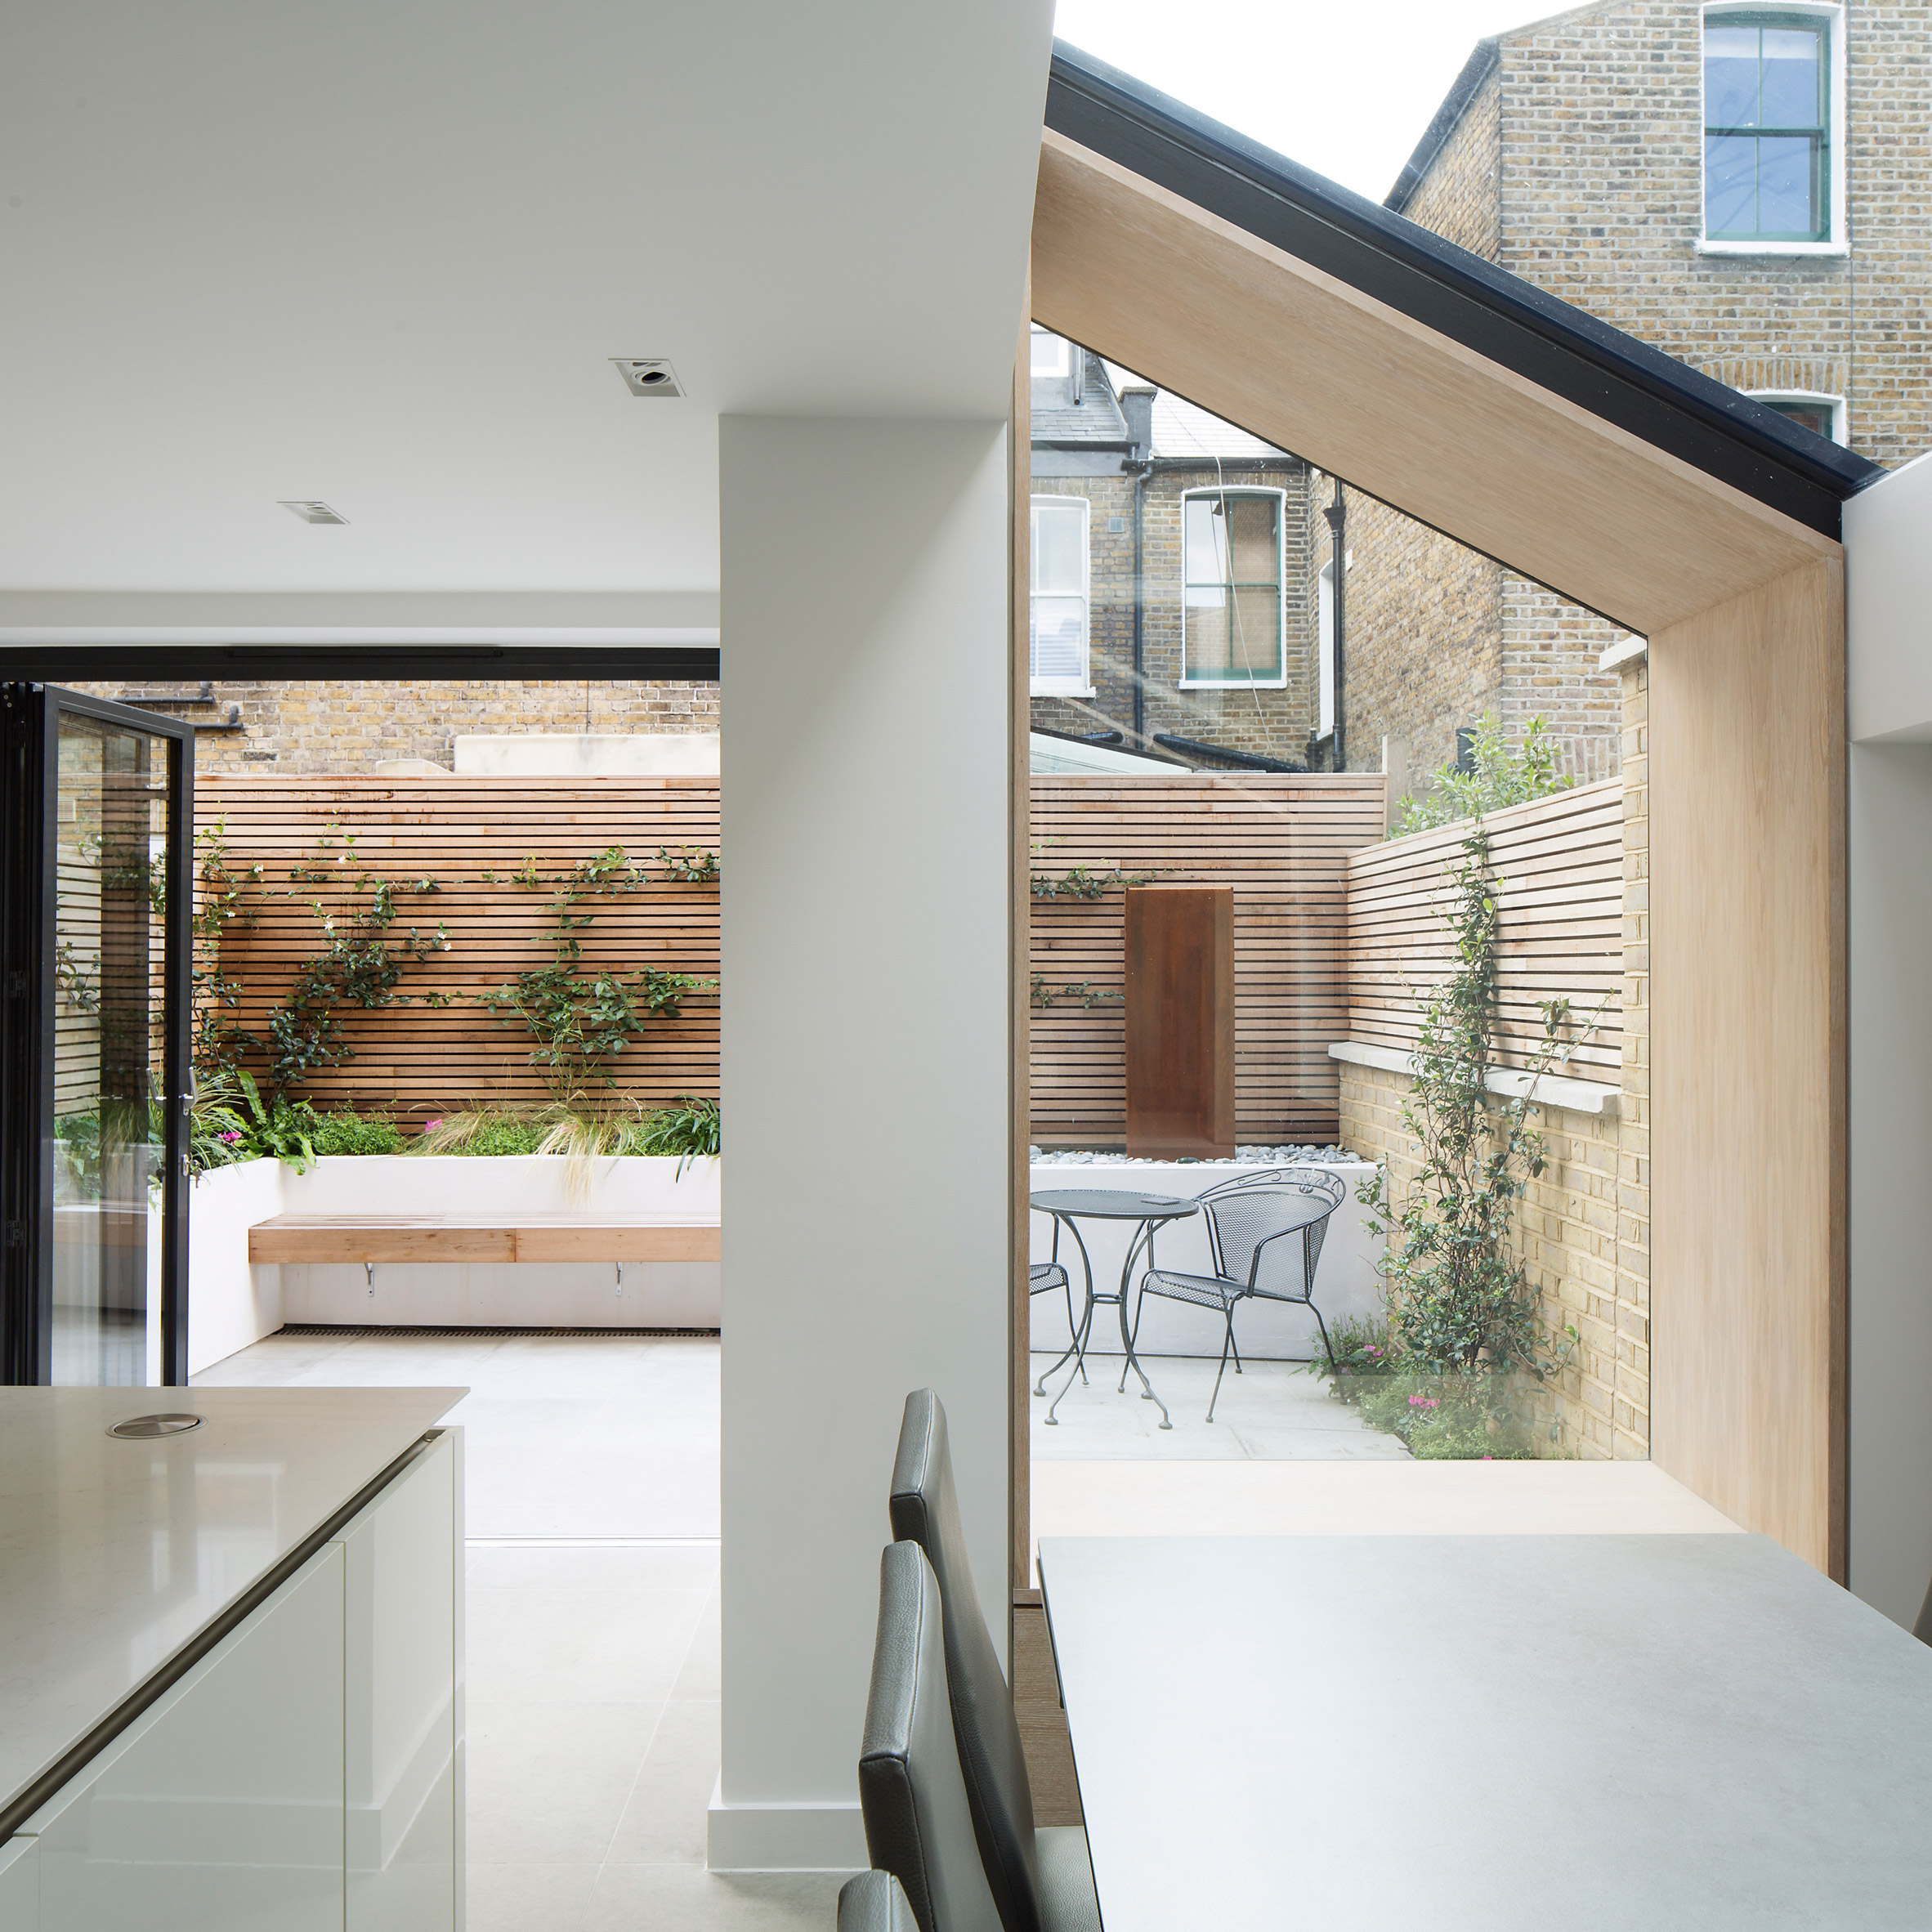 the-lined-extension-yard-architects-dont-move-improve-extensions_dezeen_sq